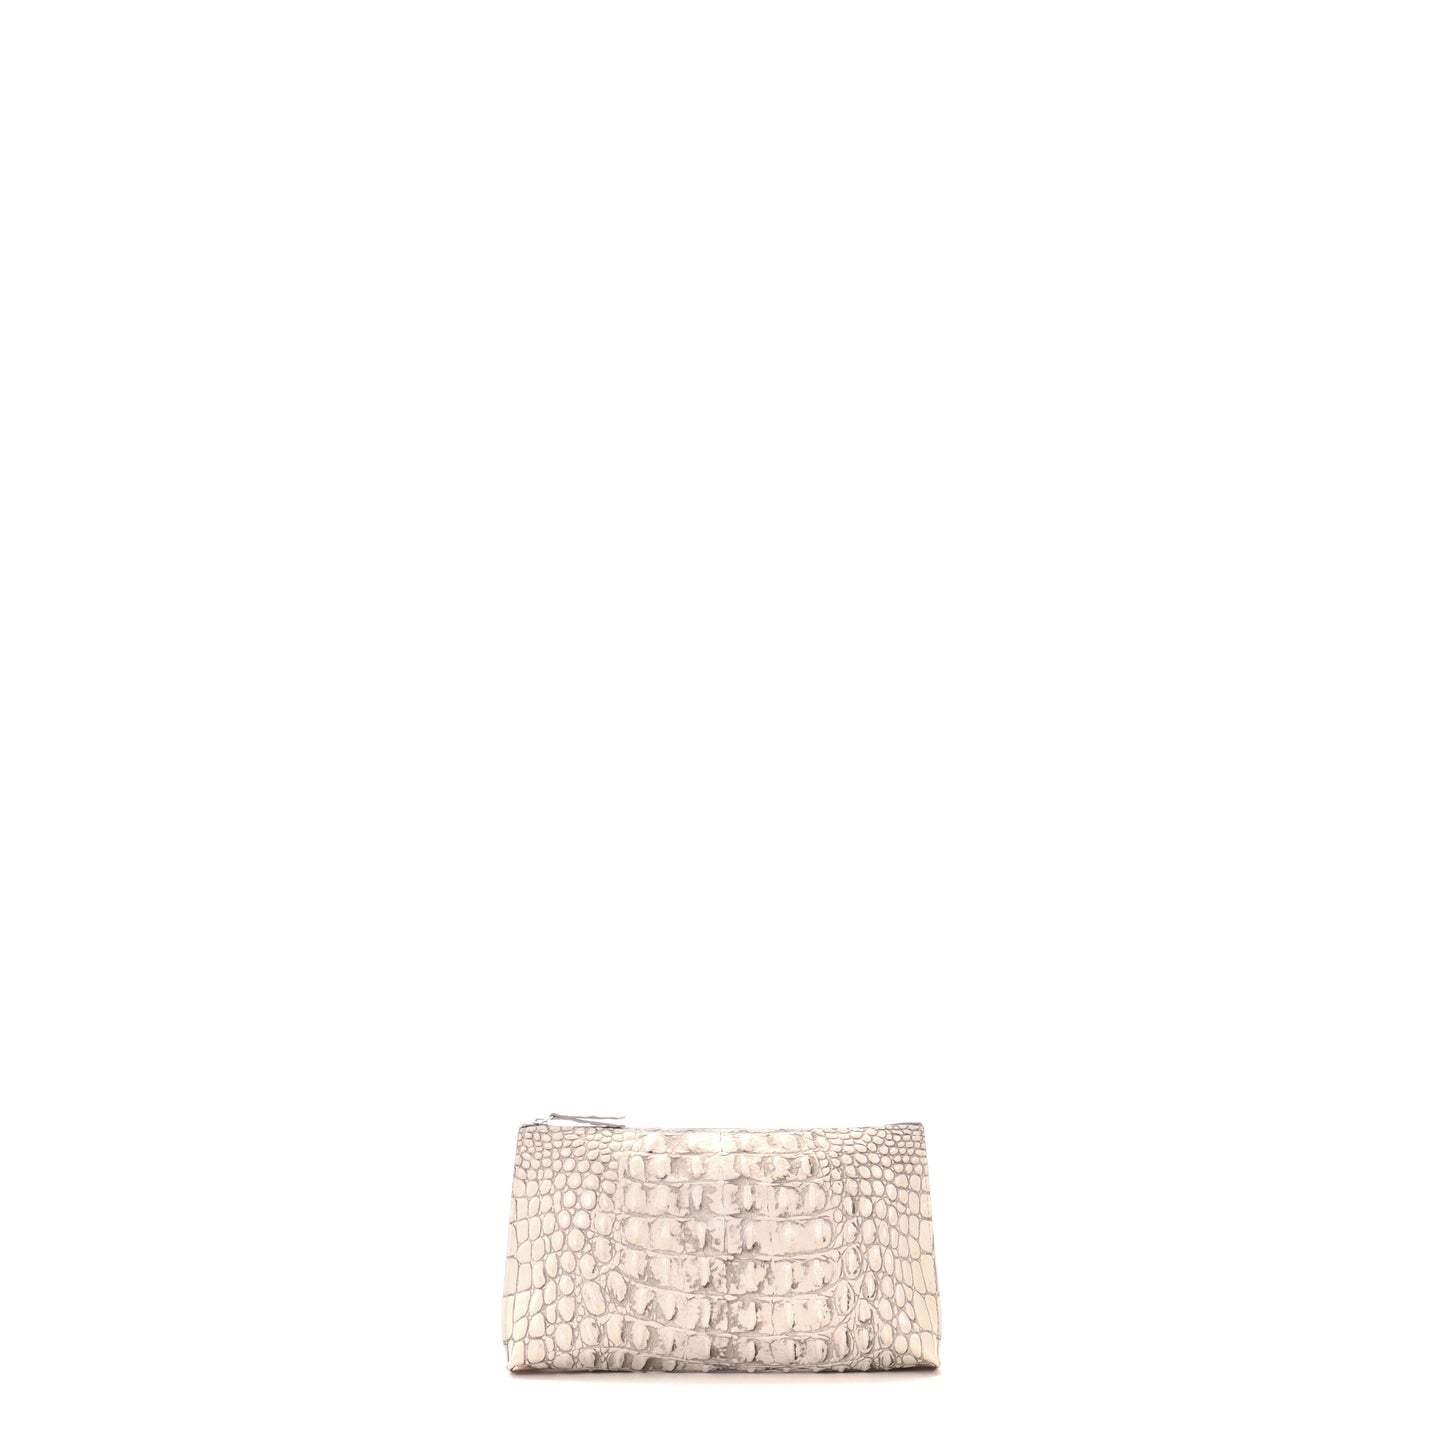 LIPSTICK POUCH OYSTER EMBOSSED CROC